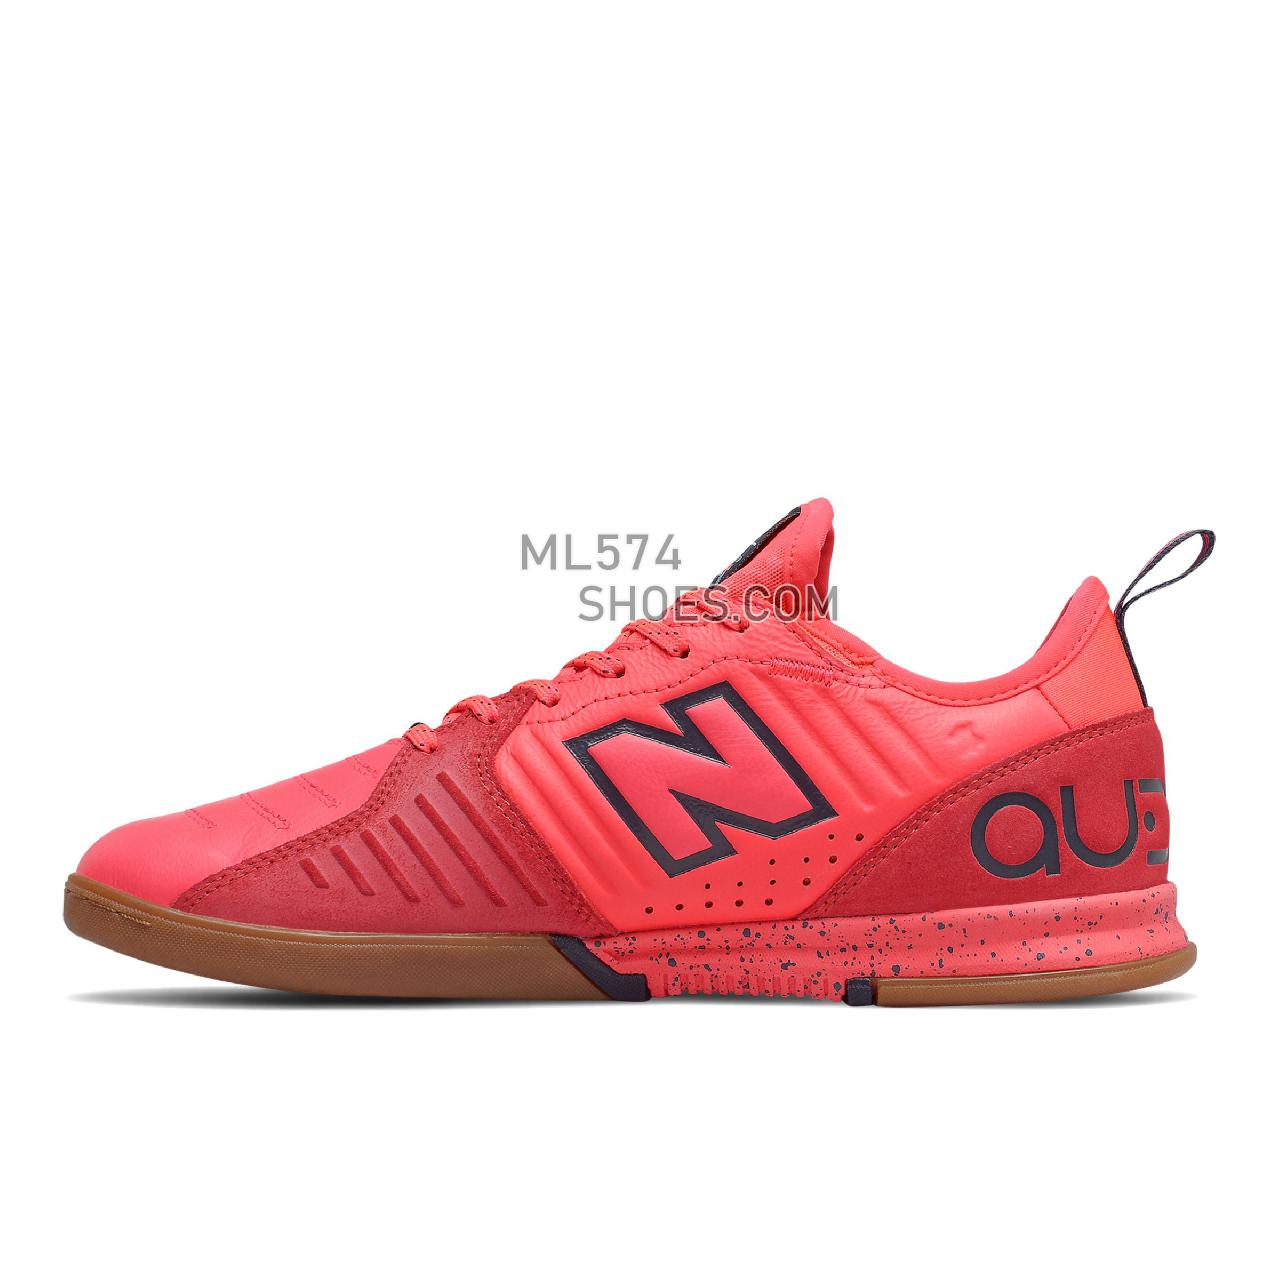 New Balance Audazo v5 Pro IN - Men's Classic Sneakers - Vivid Coral with Outerspace - MSA1IVC5